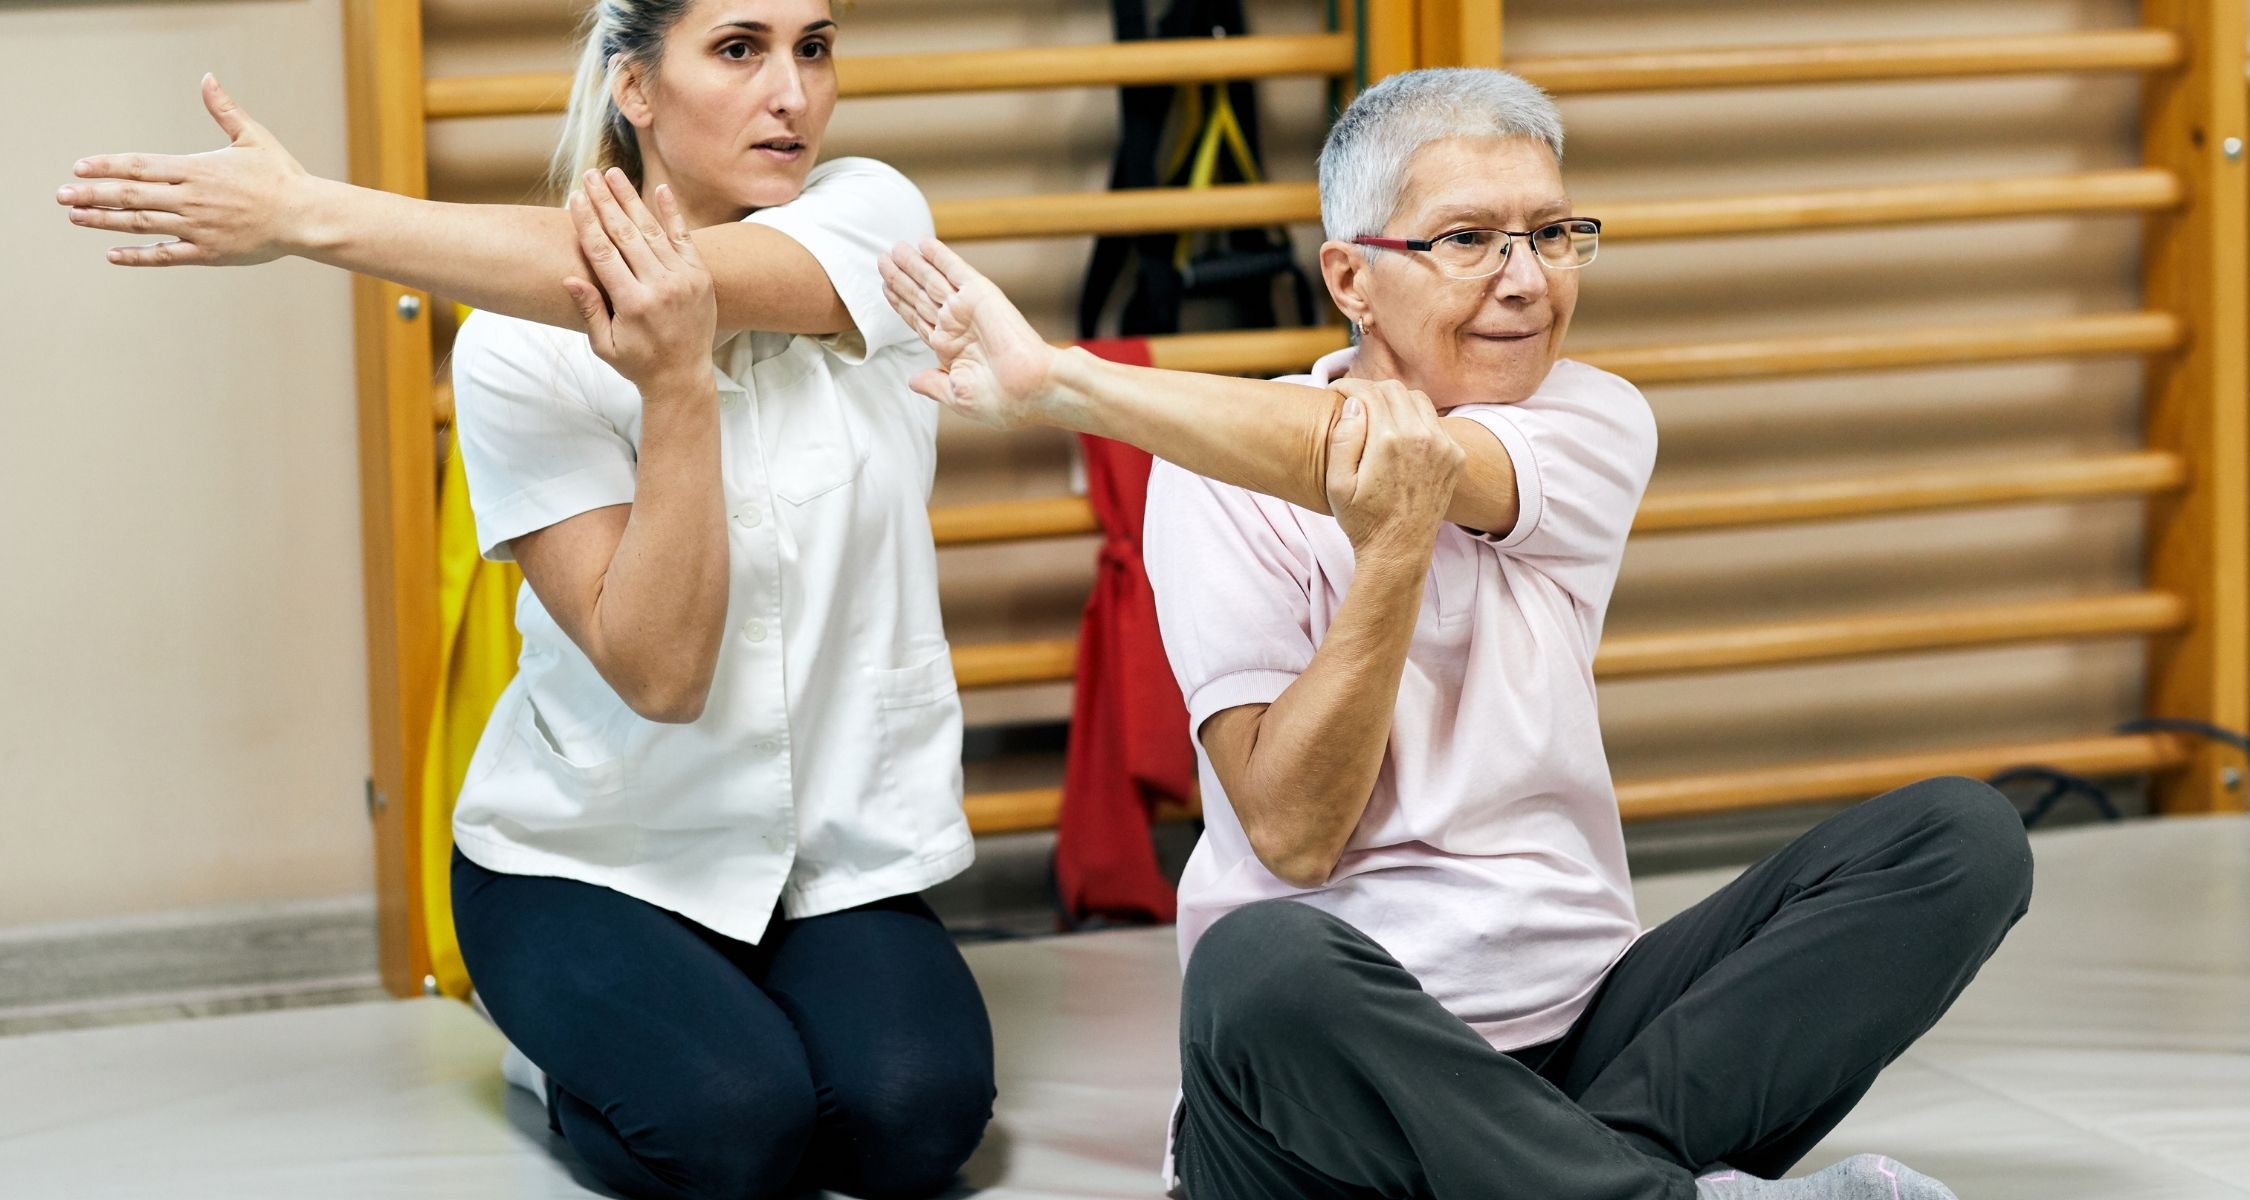 How Can Physical Therapy Be Beneficial?